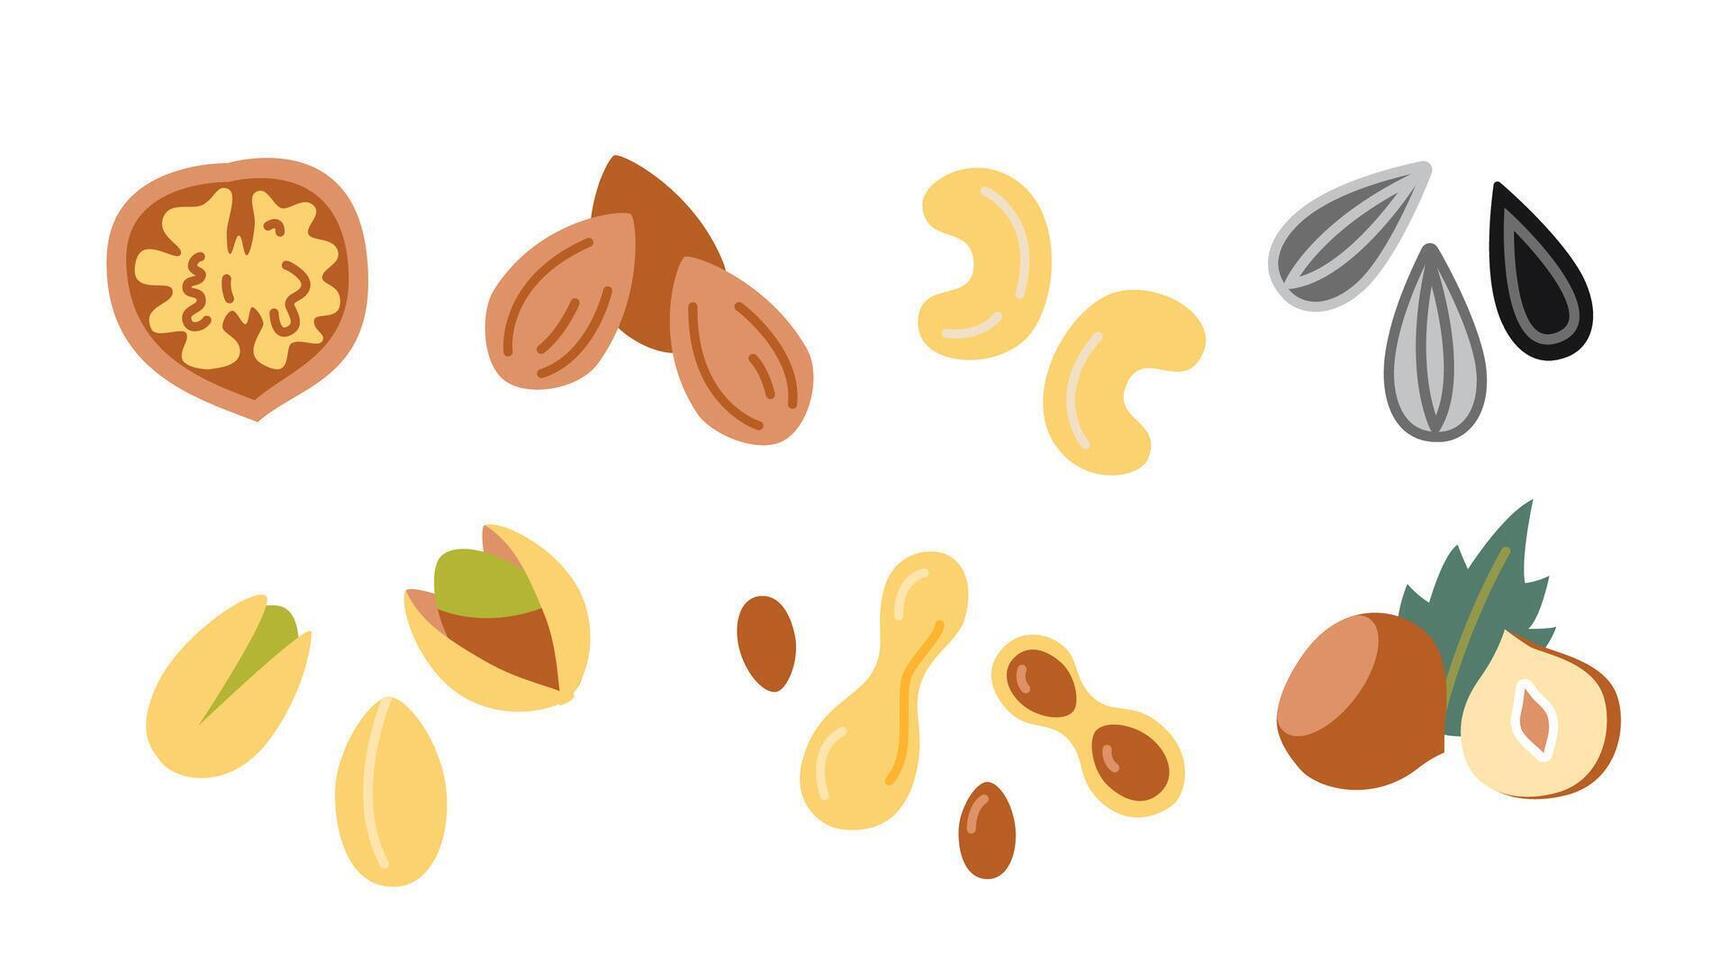 Nuts and seeds set, cartoon style. Peanut, walnut, sunflower seeds, pistachio, cashew, chazelnut and almond. Trendy modern illustration isolated on white background, hand drawn, flat design vector